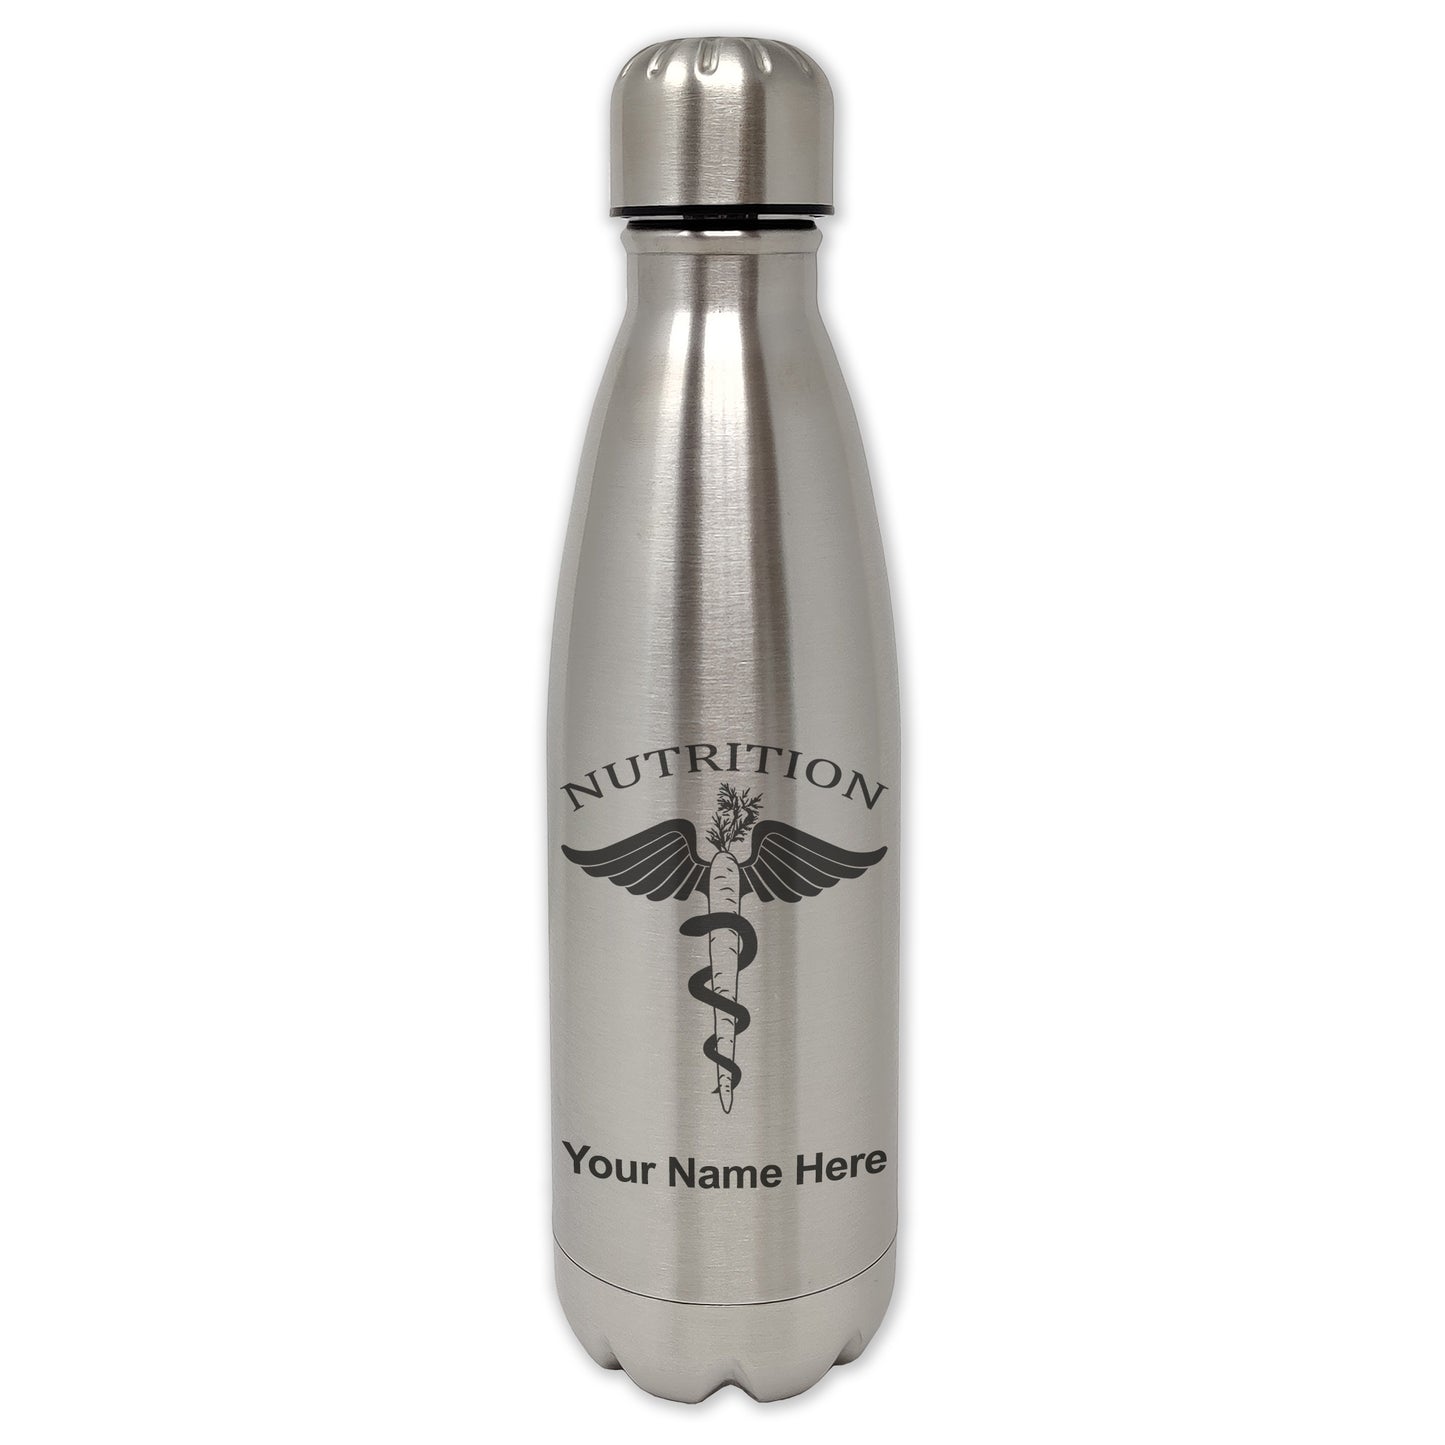 LaserGram Single Wall Water Bottle, Nutritionist, Personalized Engraving Included